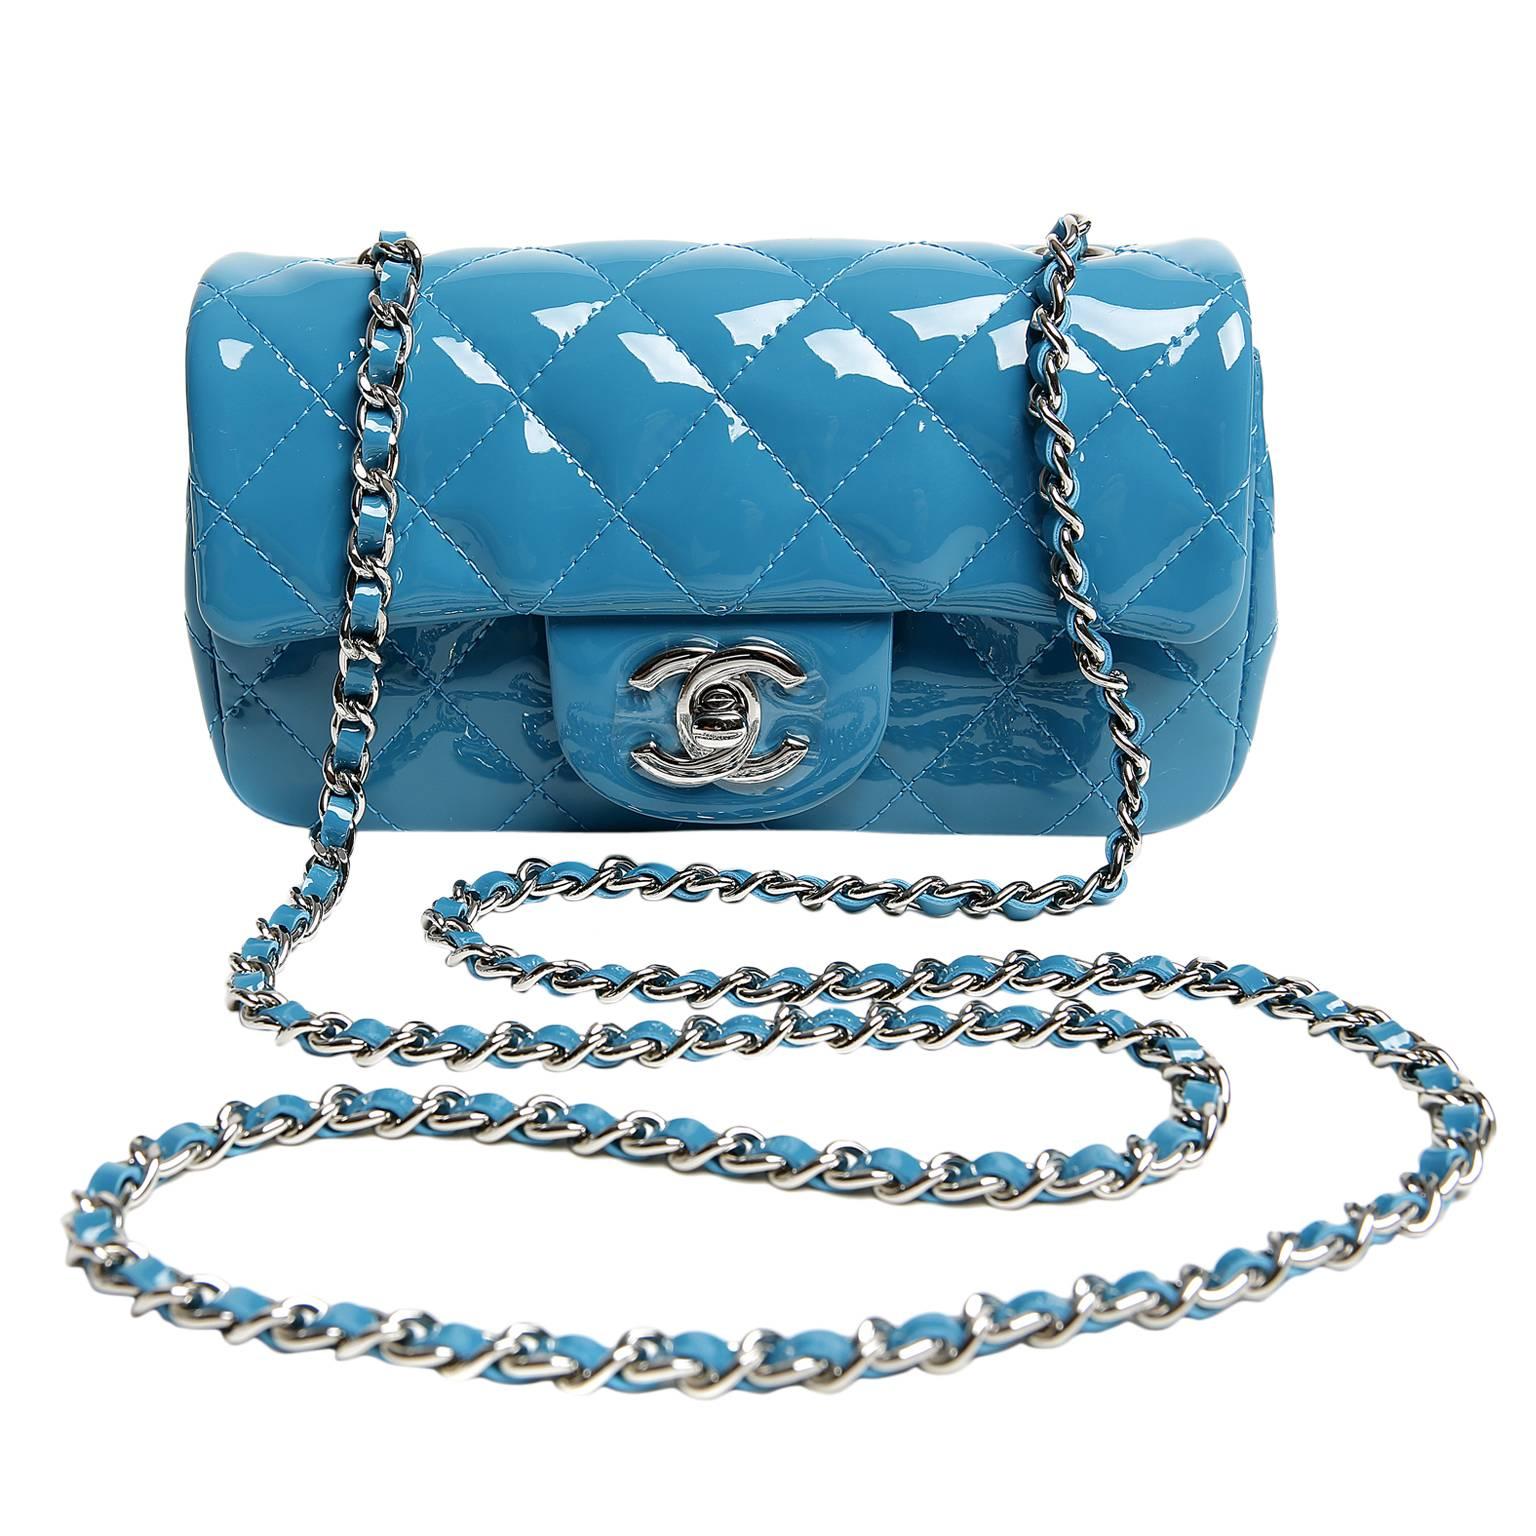 Chanel Turquoise Patent Extra Mini Classic Flap Bag